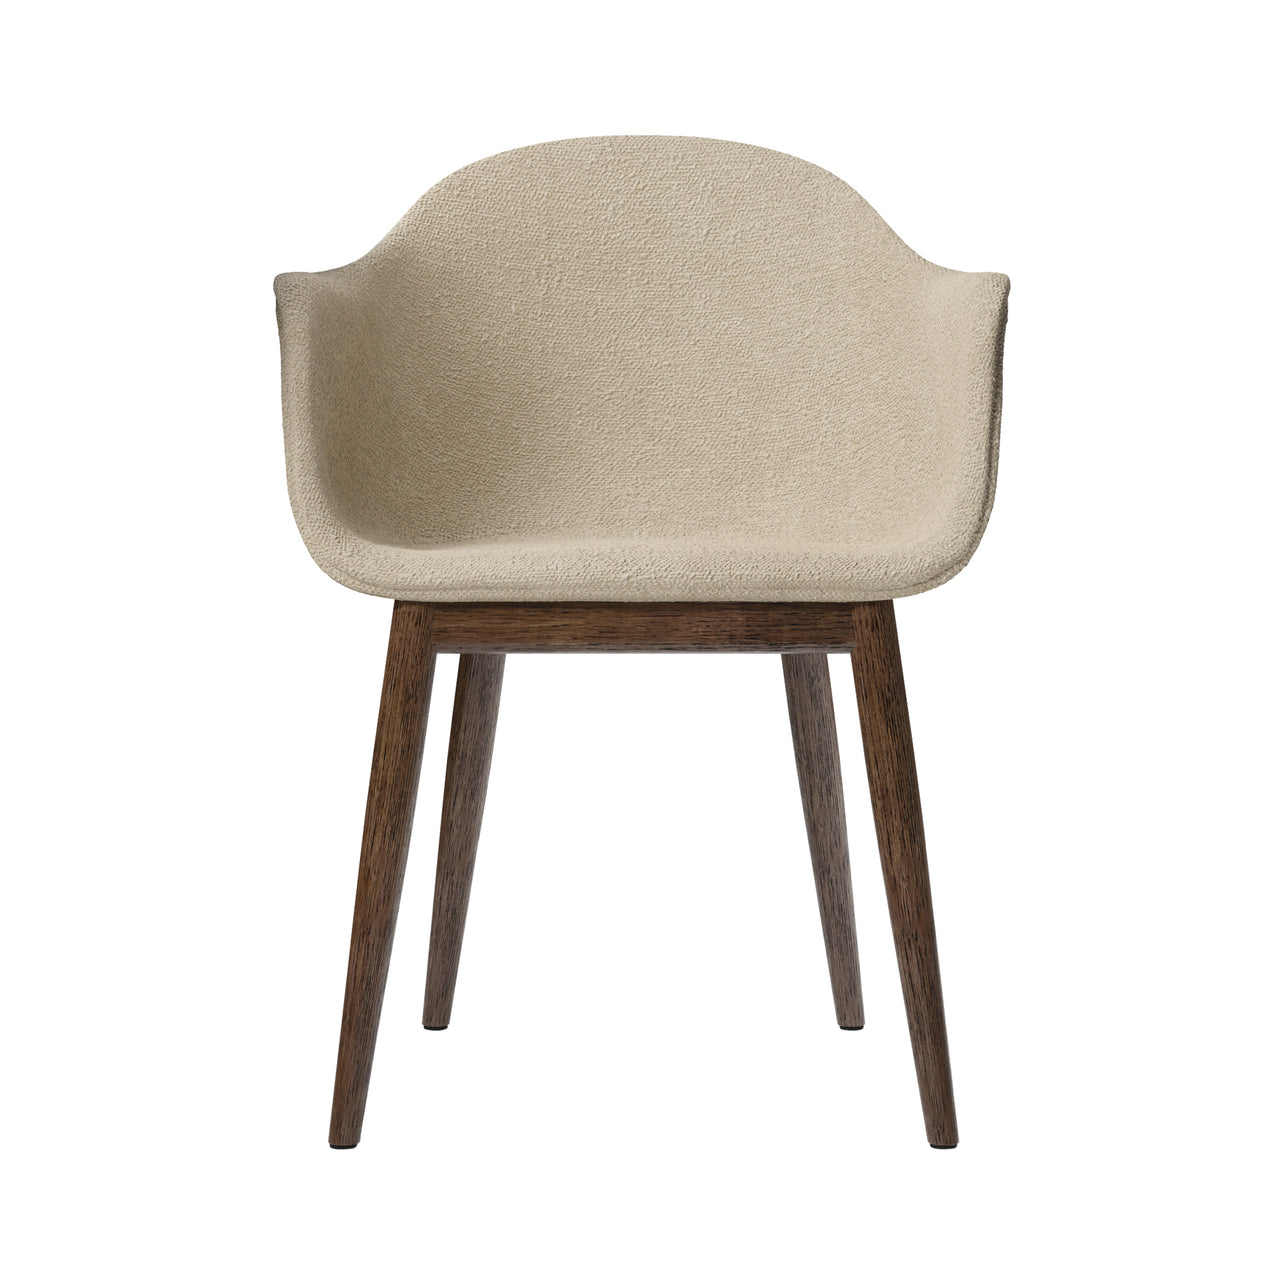 Harbour Dining Chair: Wood Base Upholstered + Dark Stained Oak